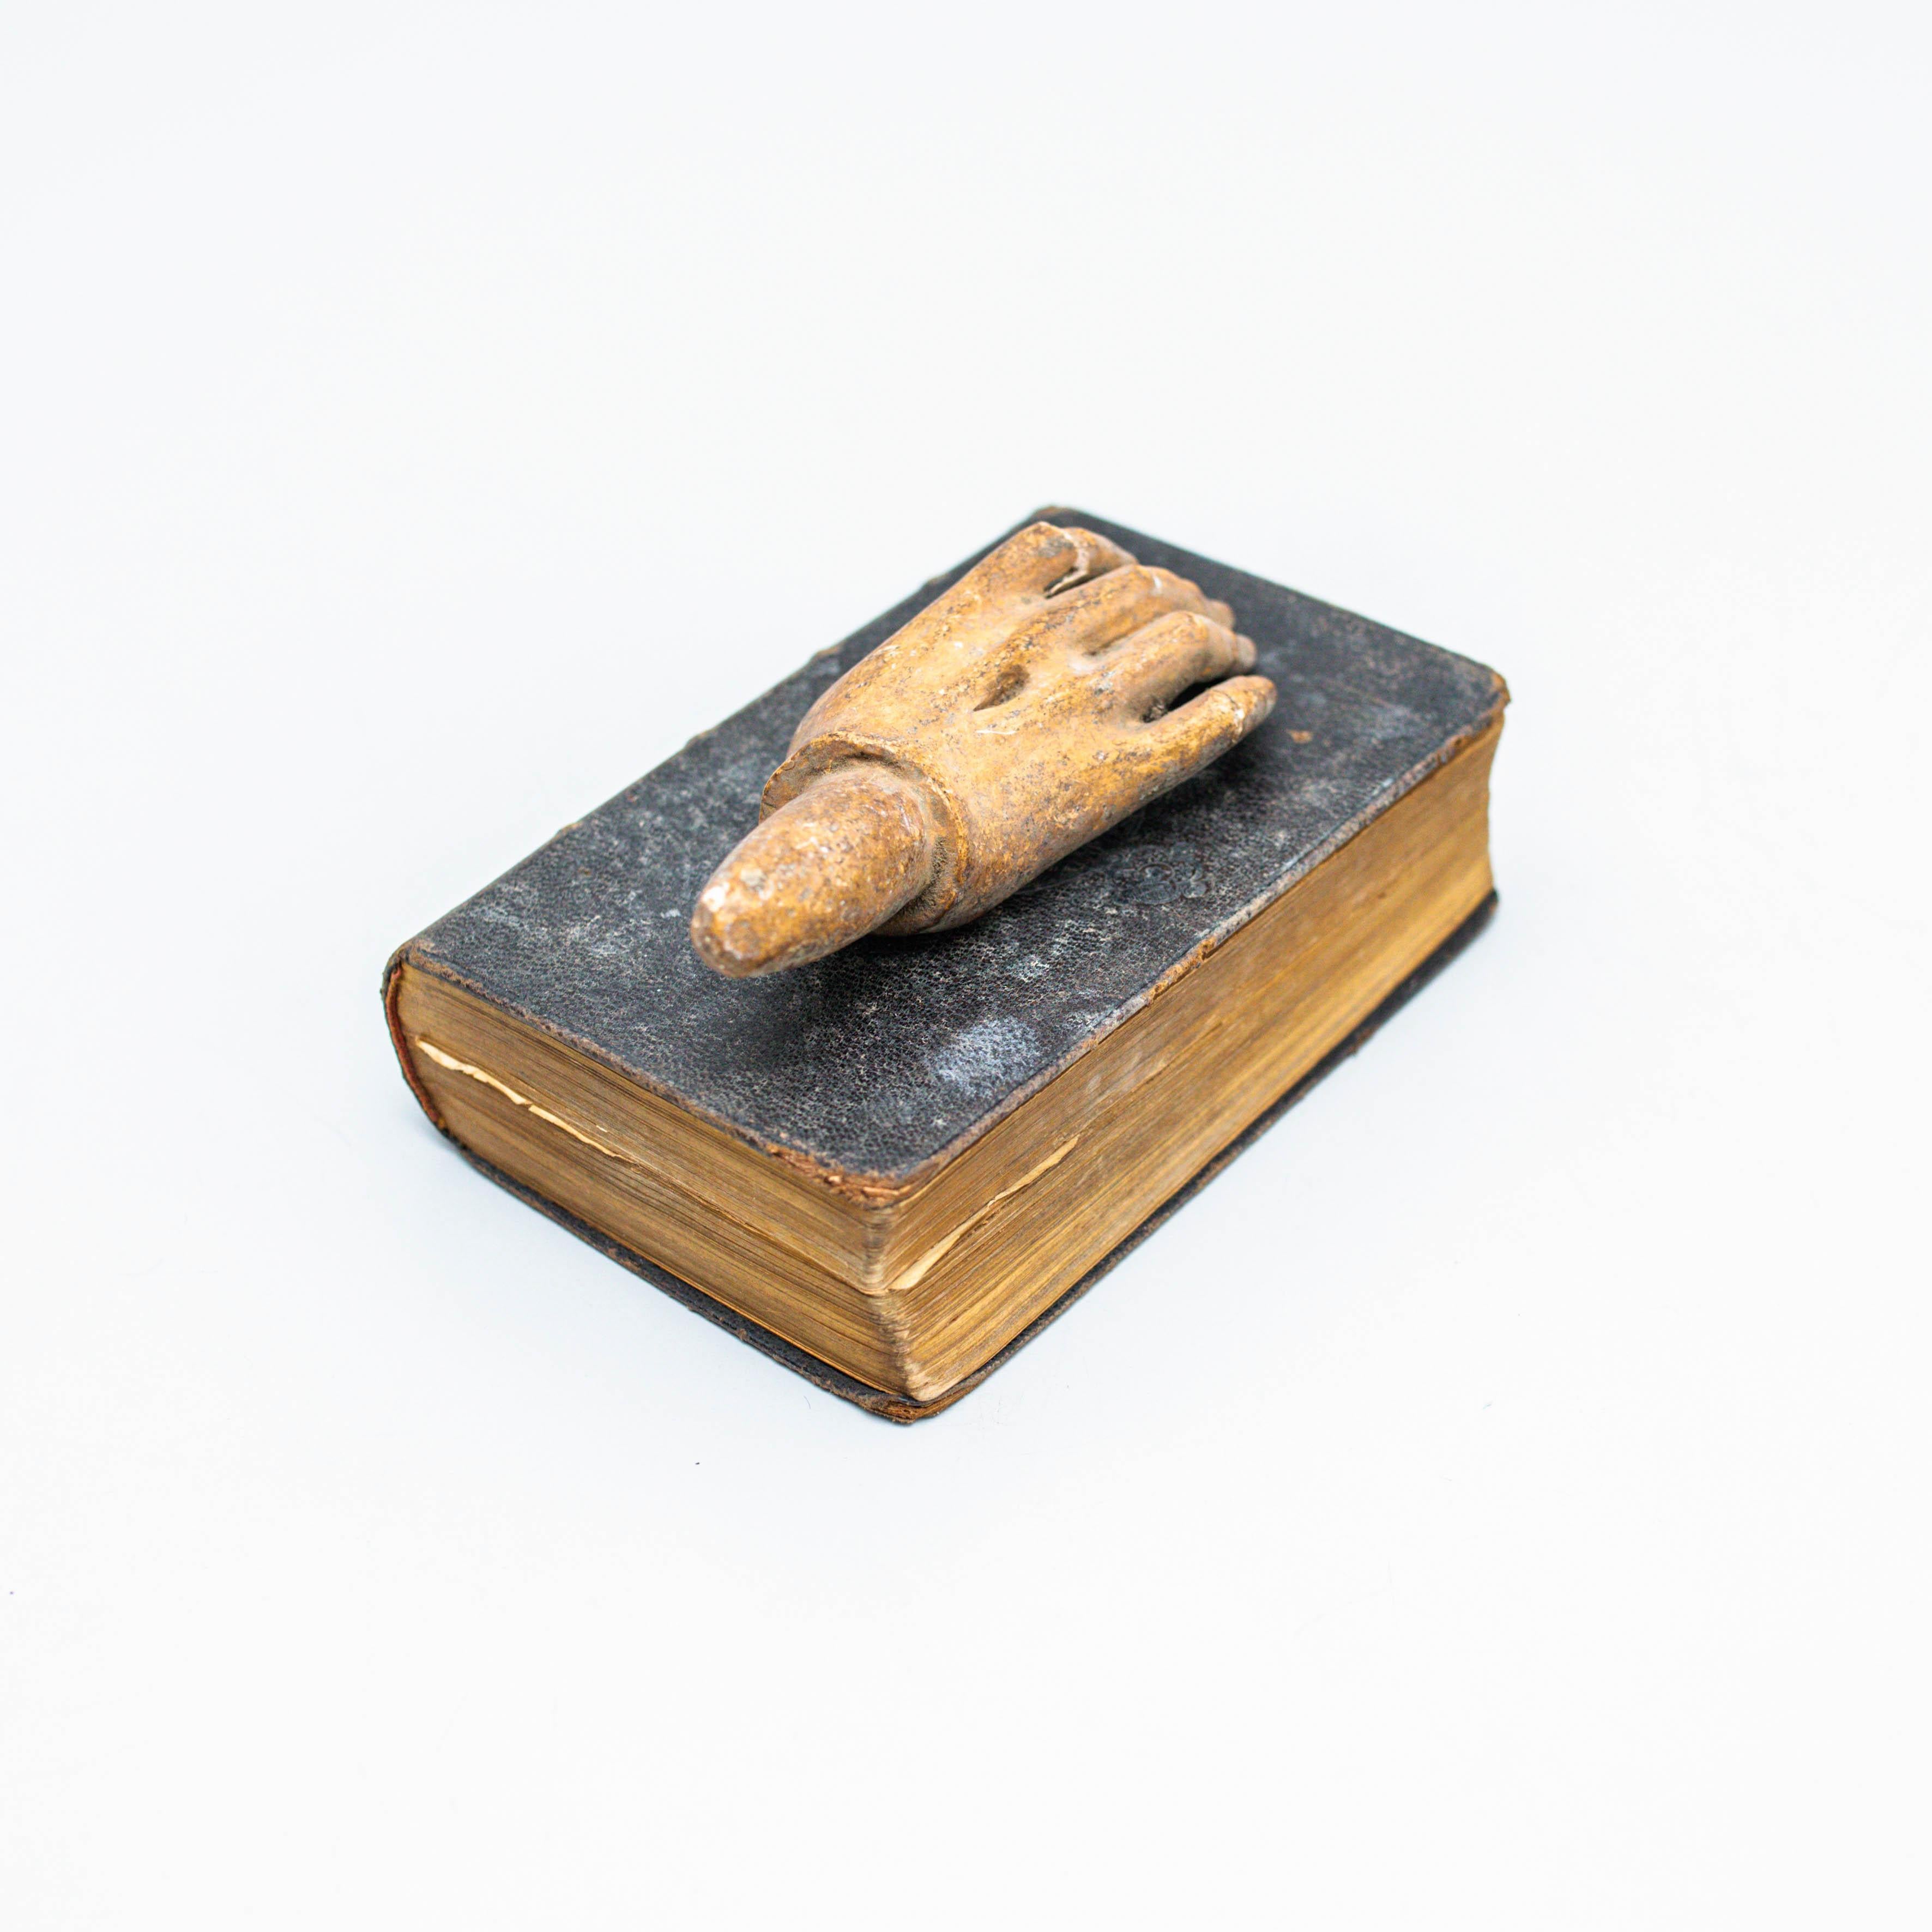 Artwork With Old Book and Mysterious Sculpture Hand.

Made by unknown artist in Spain, circa 1990.

In original condition, with minor wear consistent with age and use, preserving a beautiful patina. 

Materials:
Wood.
Chalk.

Measures:
H 7cm
W